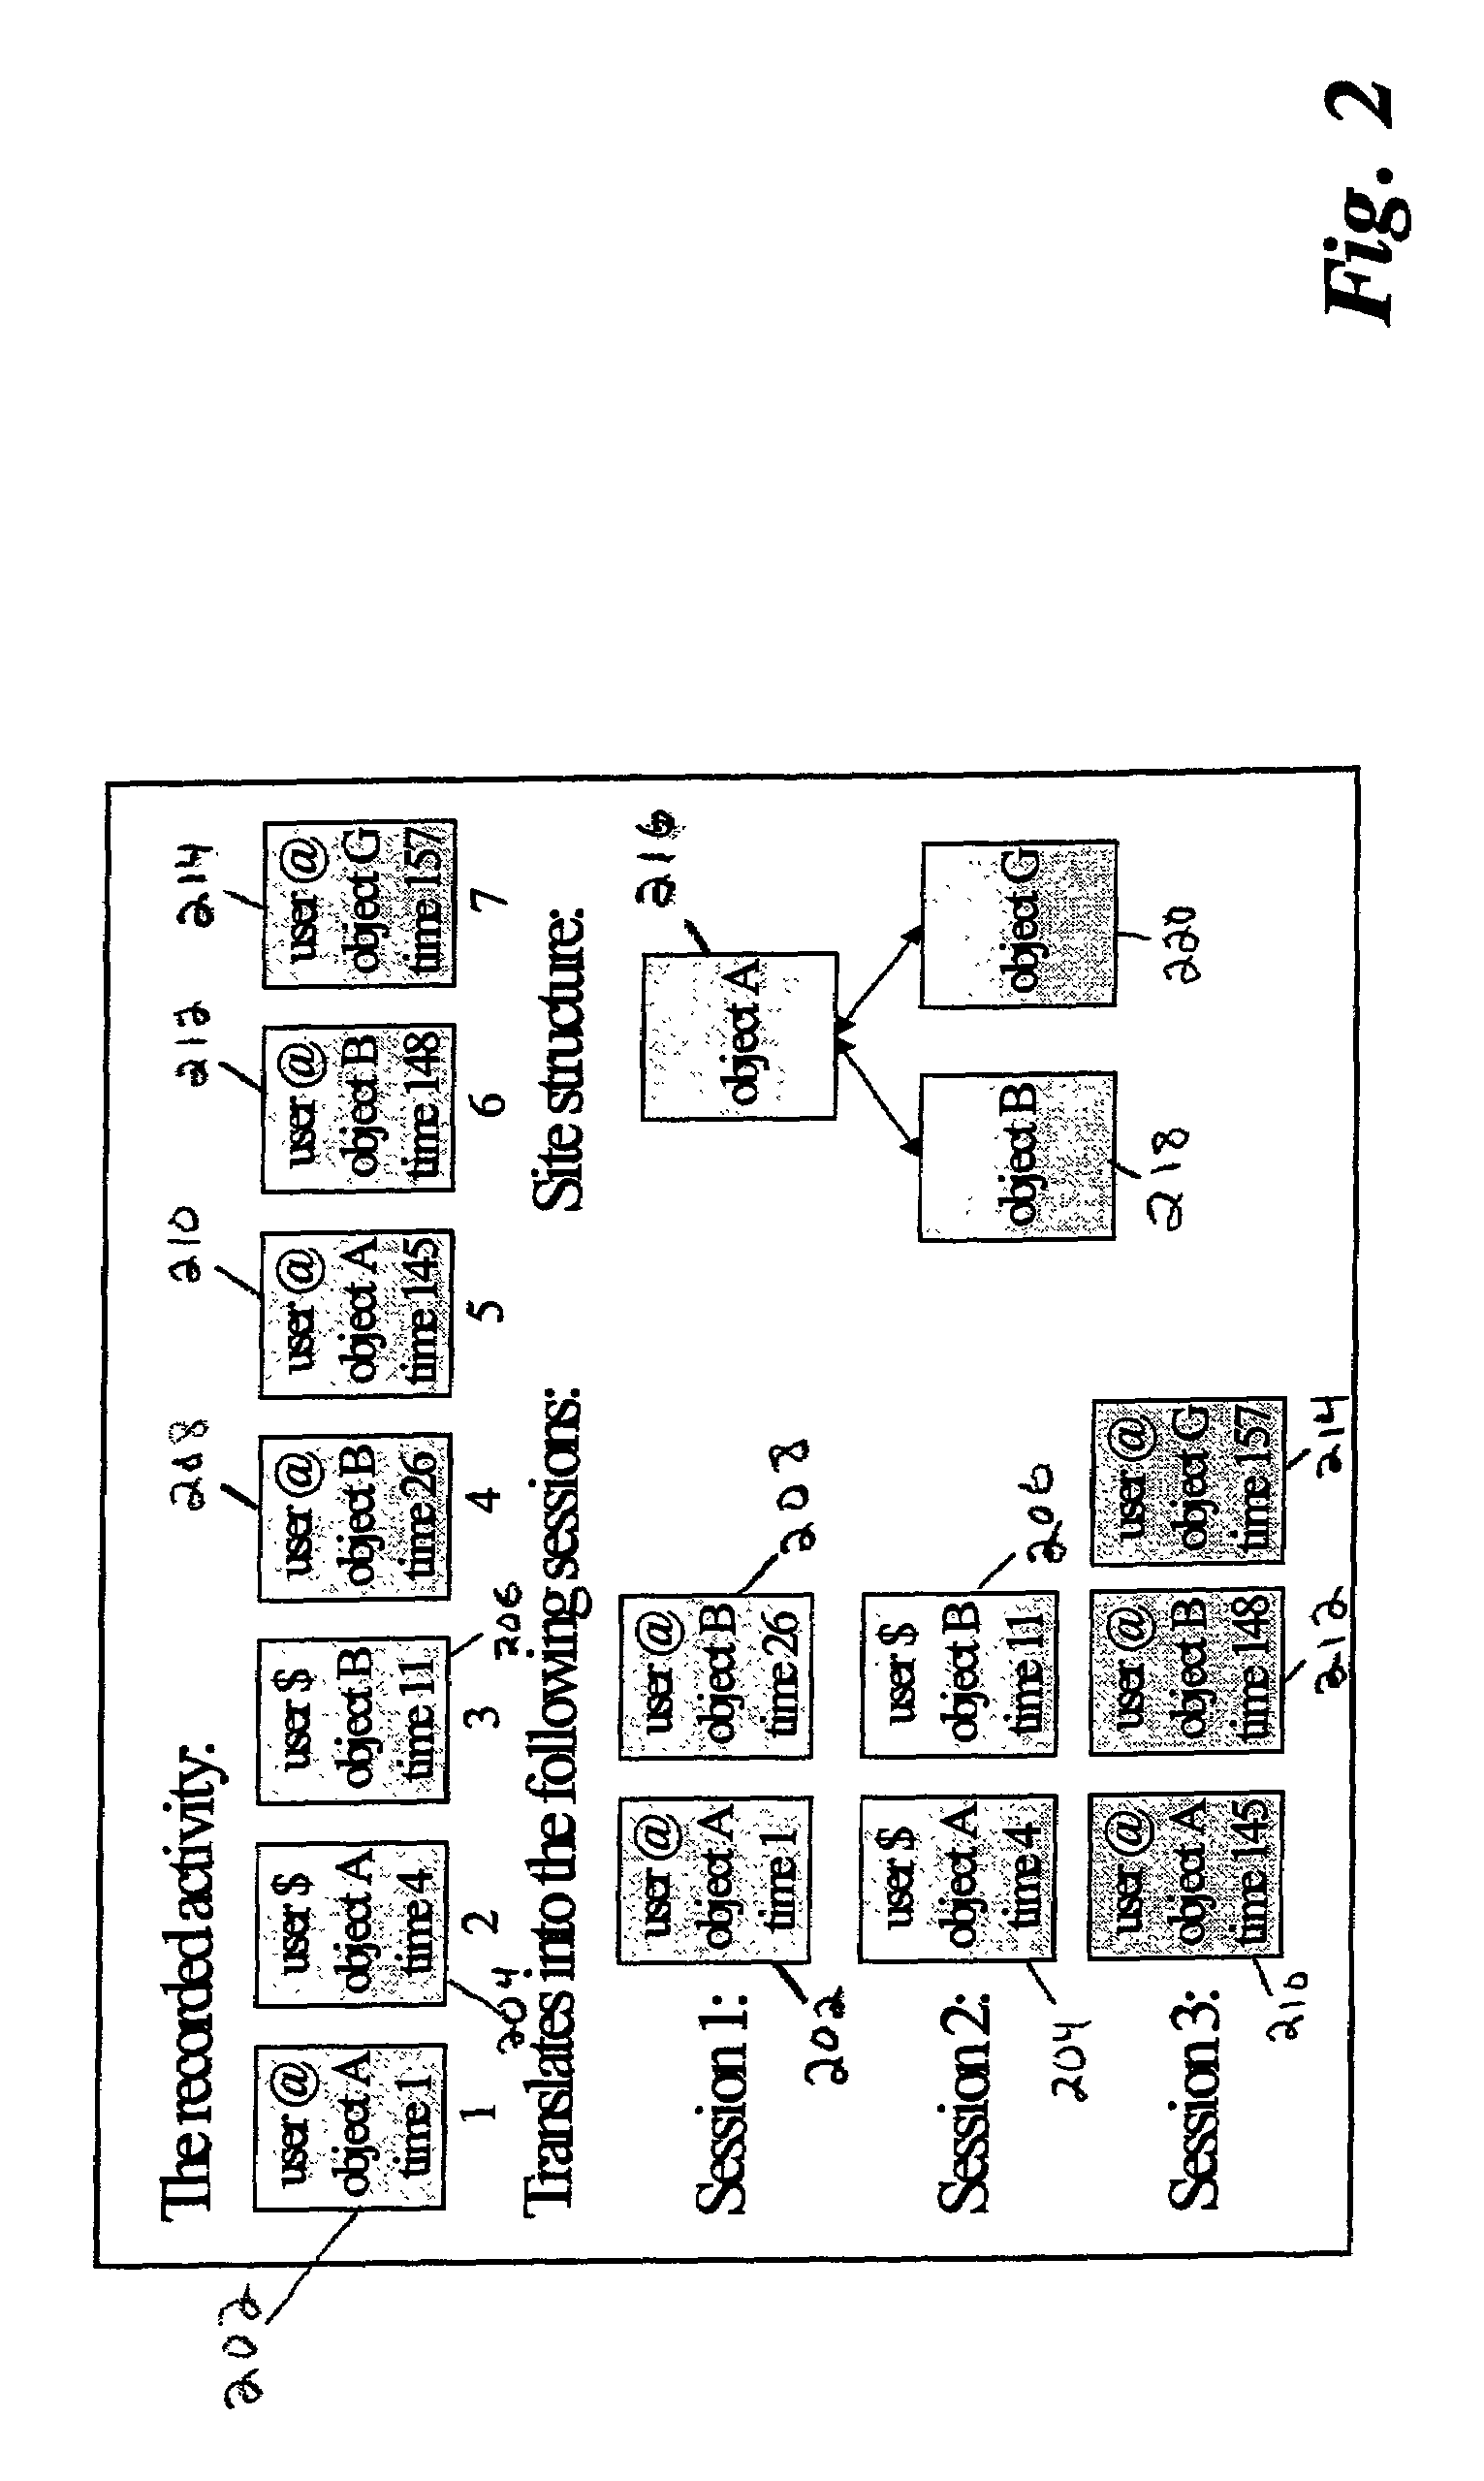 System and method for providing customized web pages